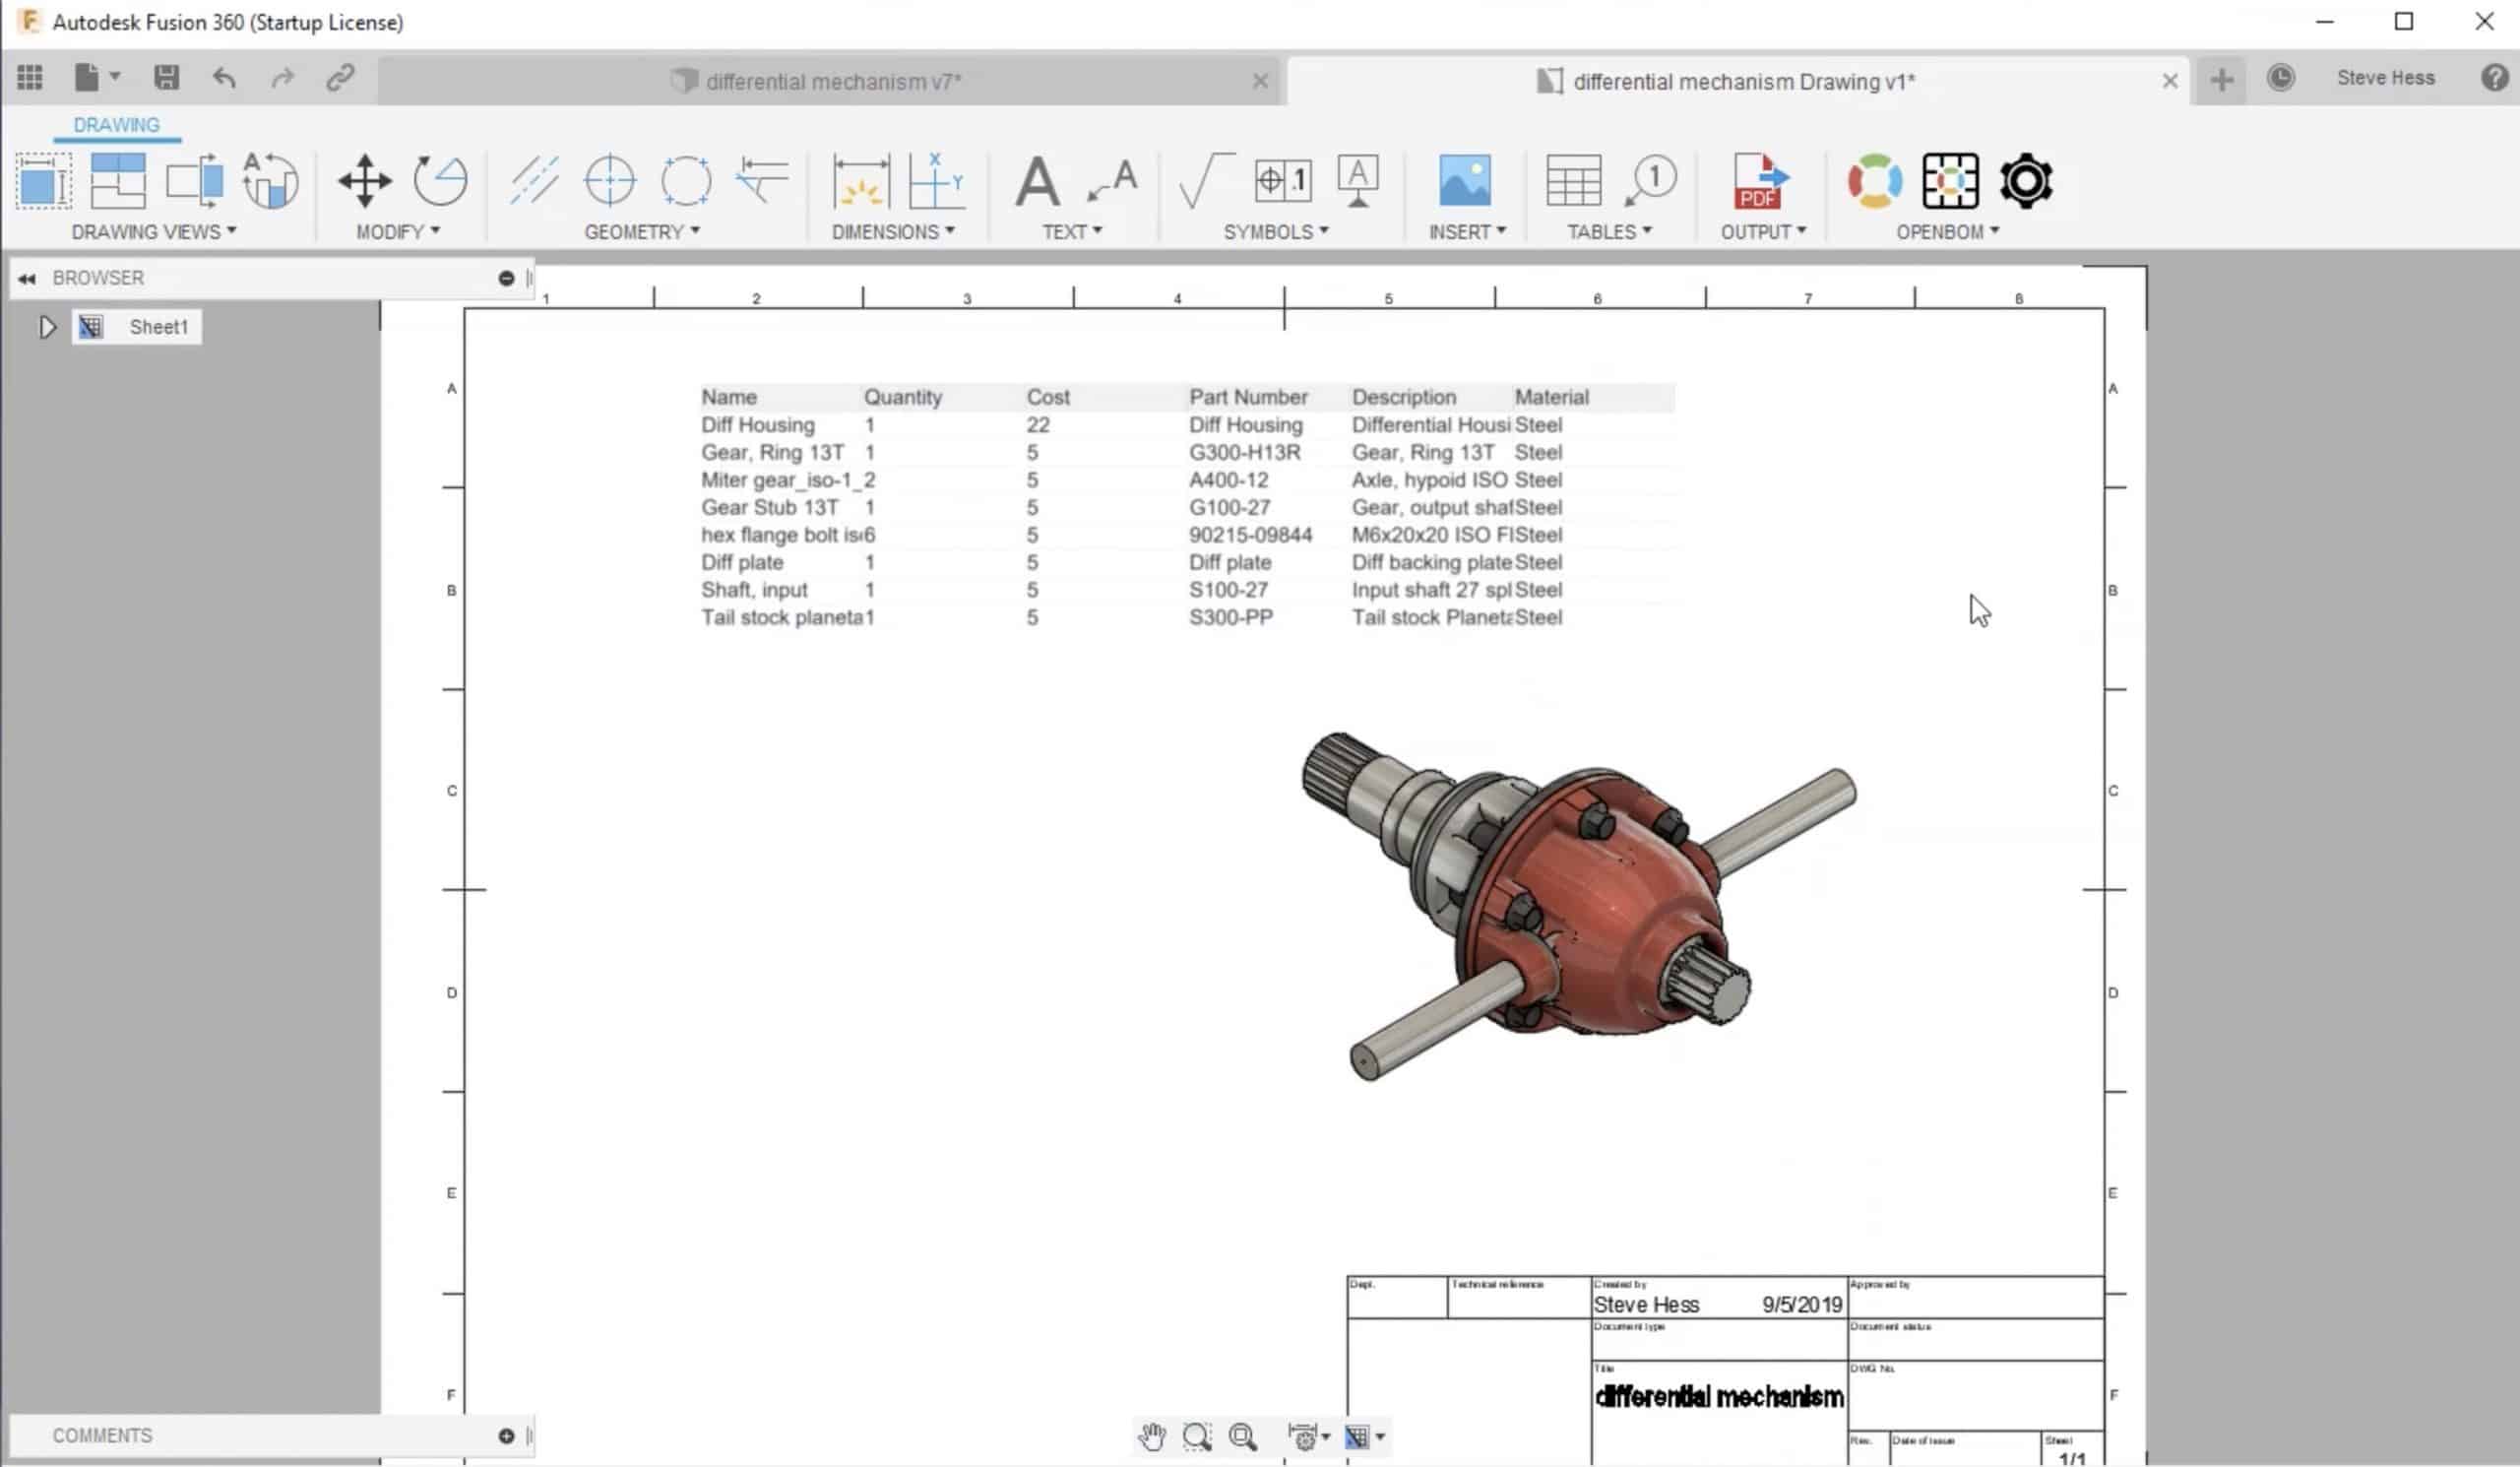 Heads up: New OpenBOM integration with Autodesk Fusion 360 – Templates and Drawing Support